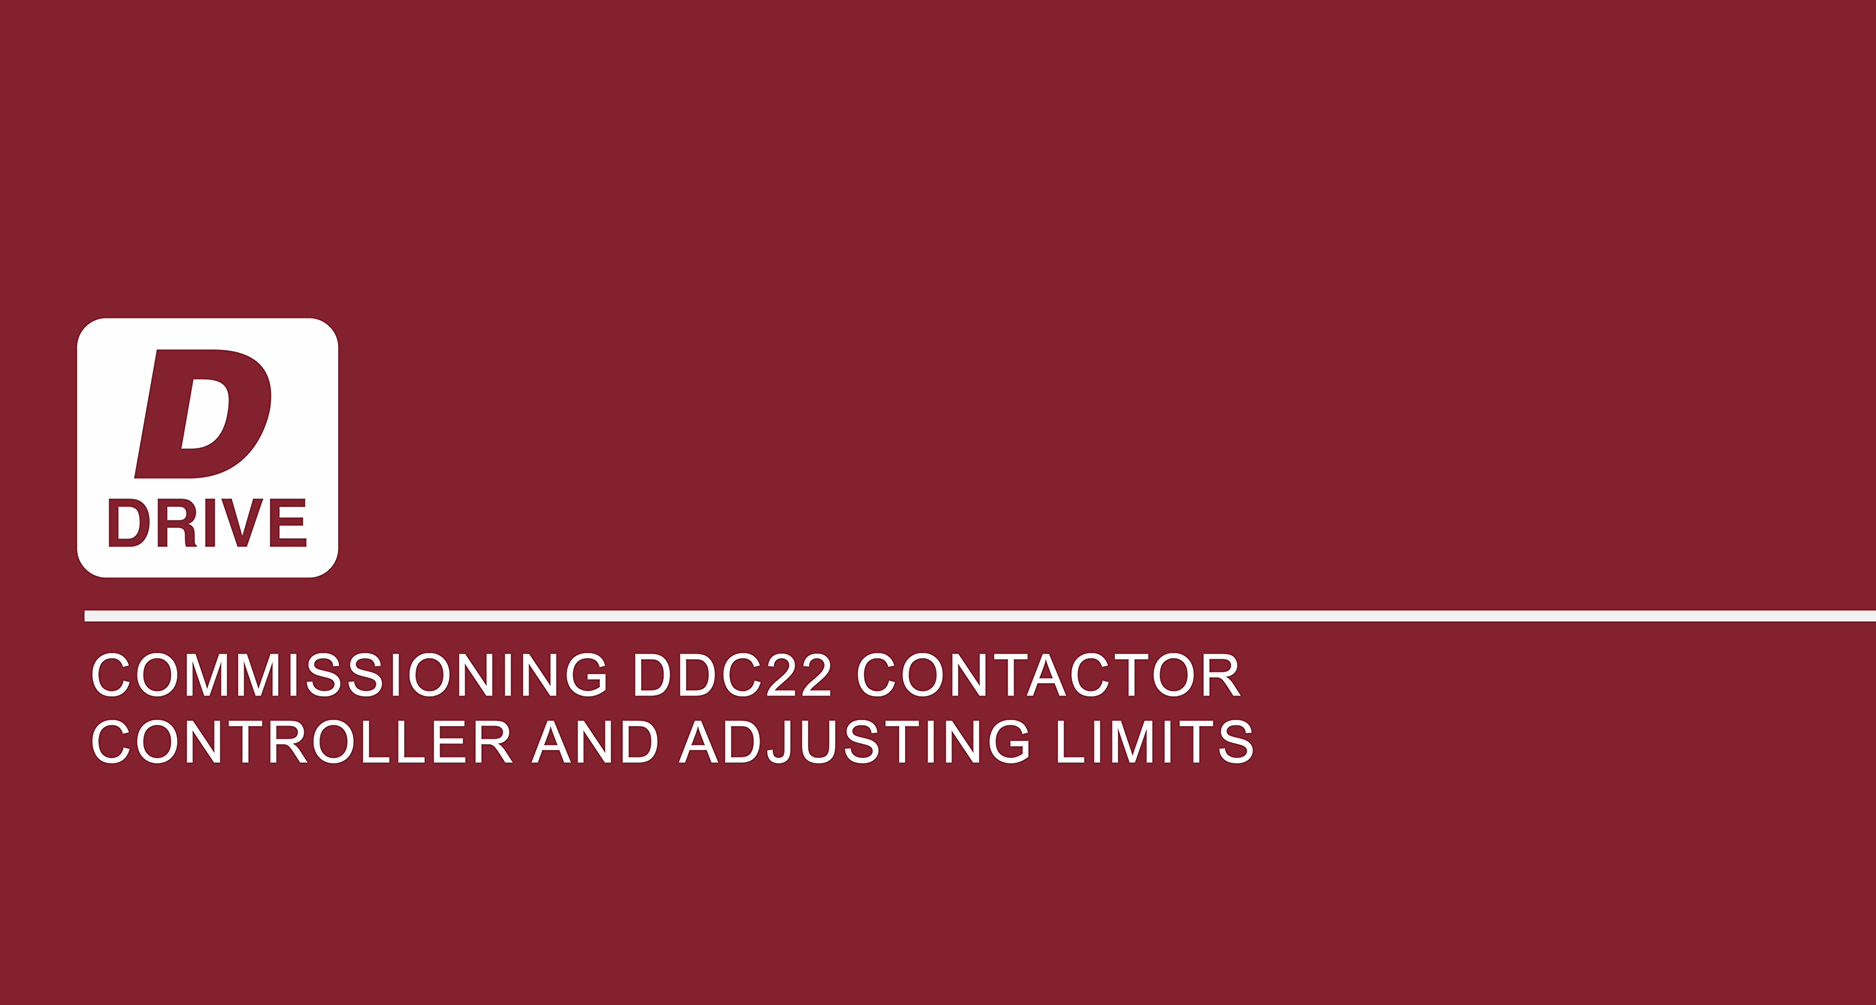 Commissioning DDC22 contractor controller and adjusting limits